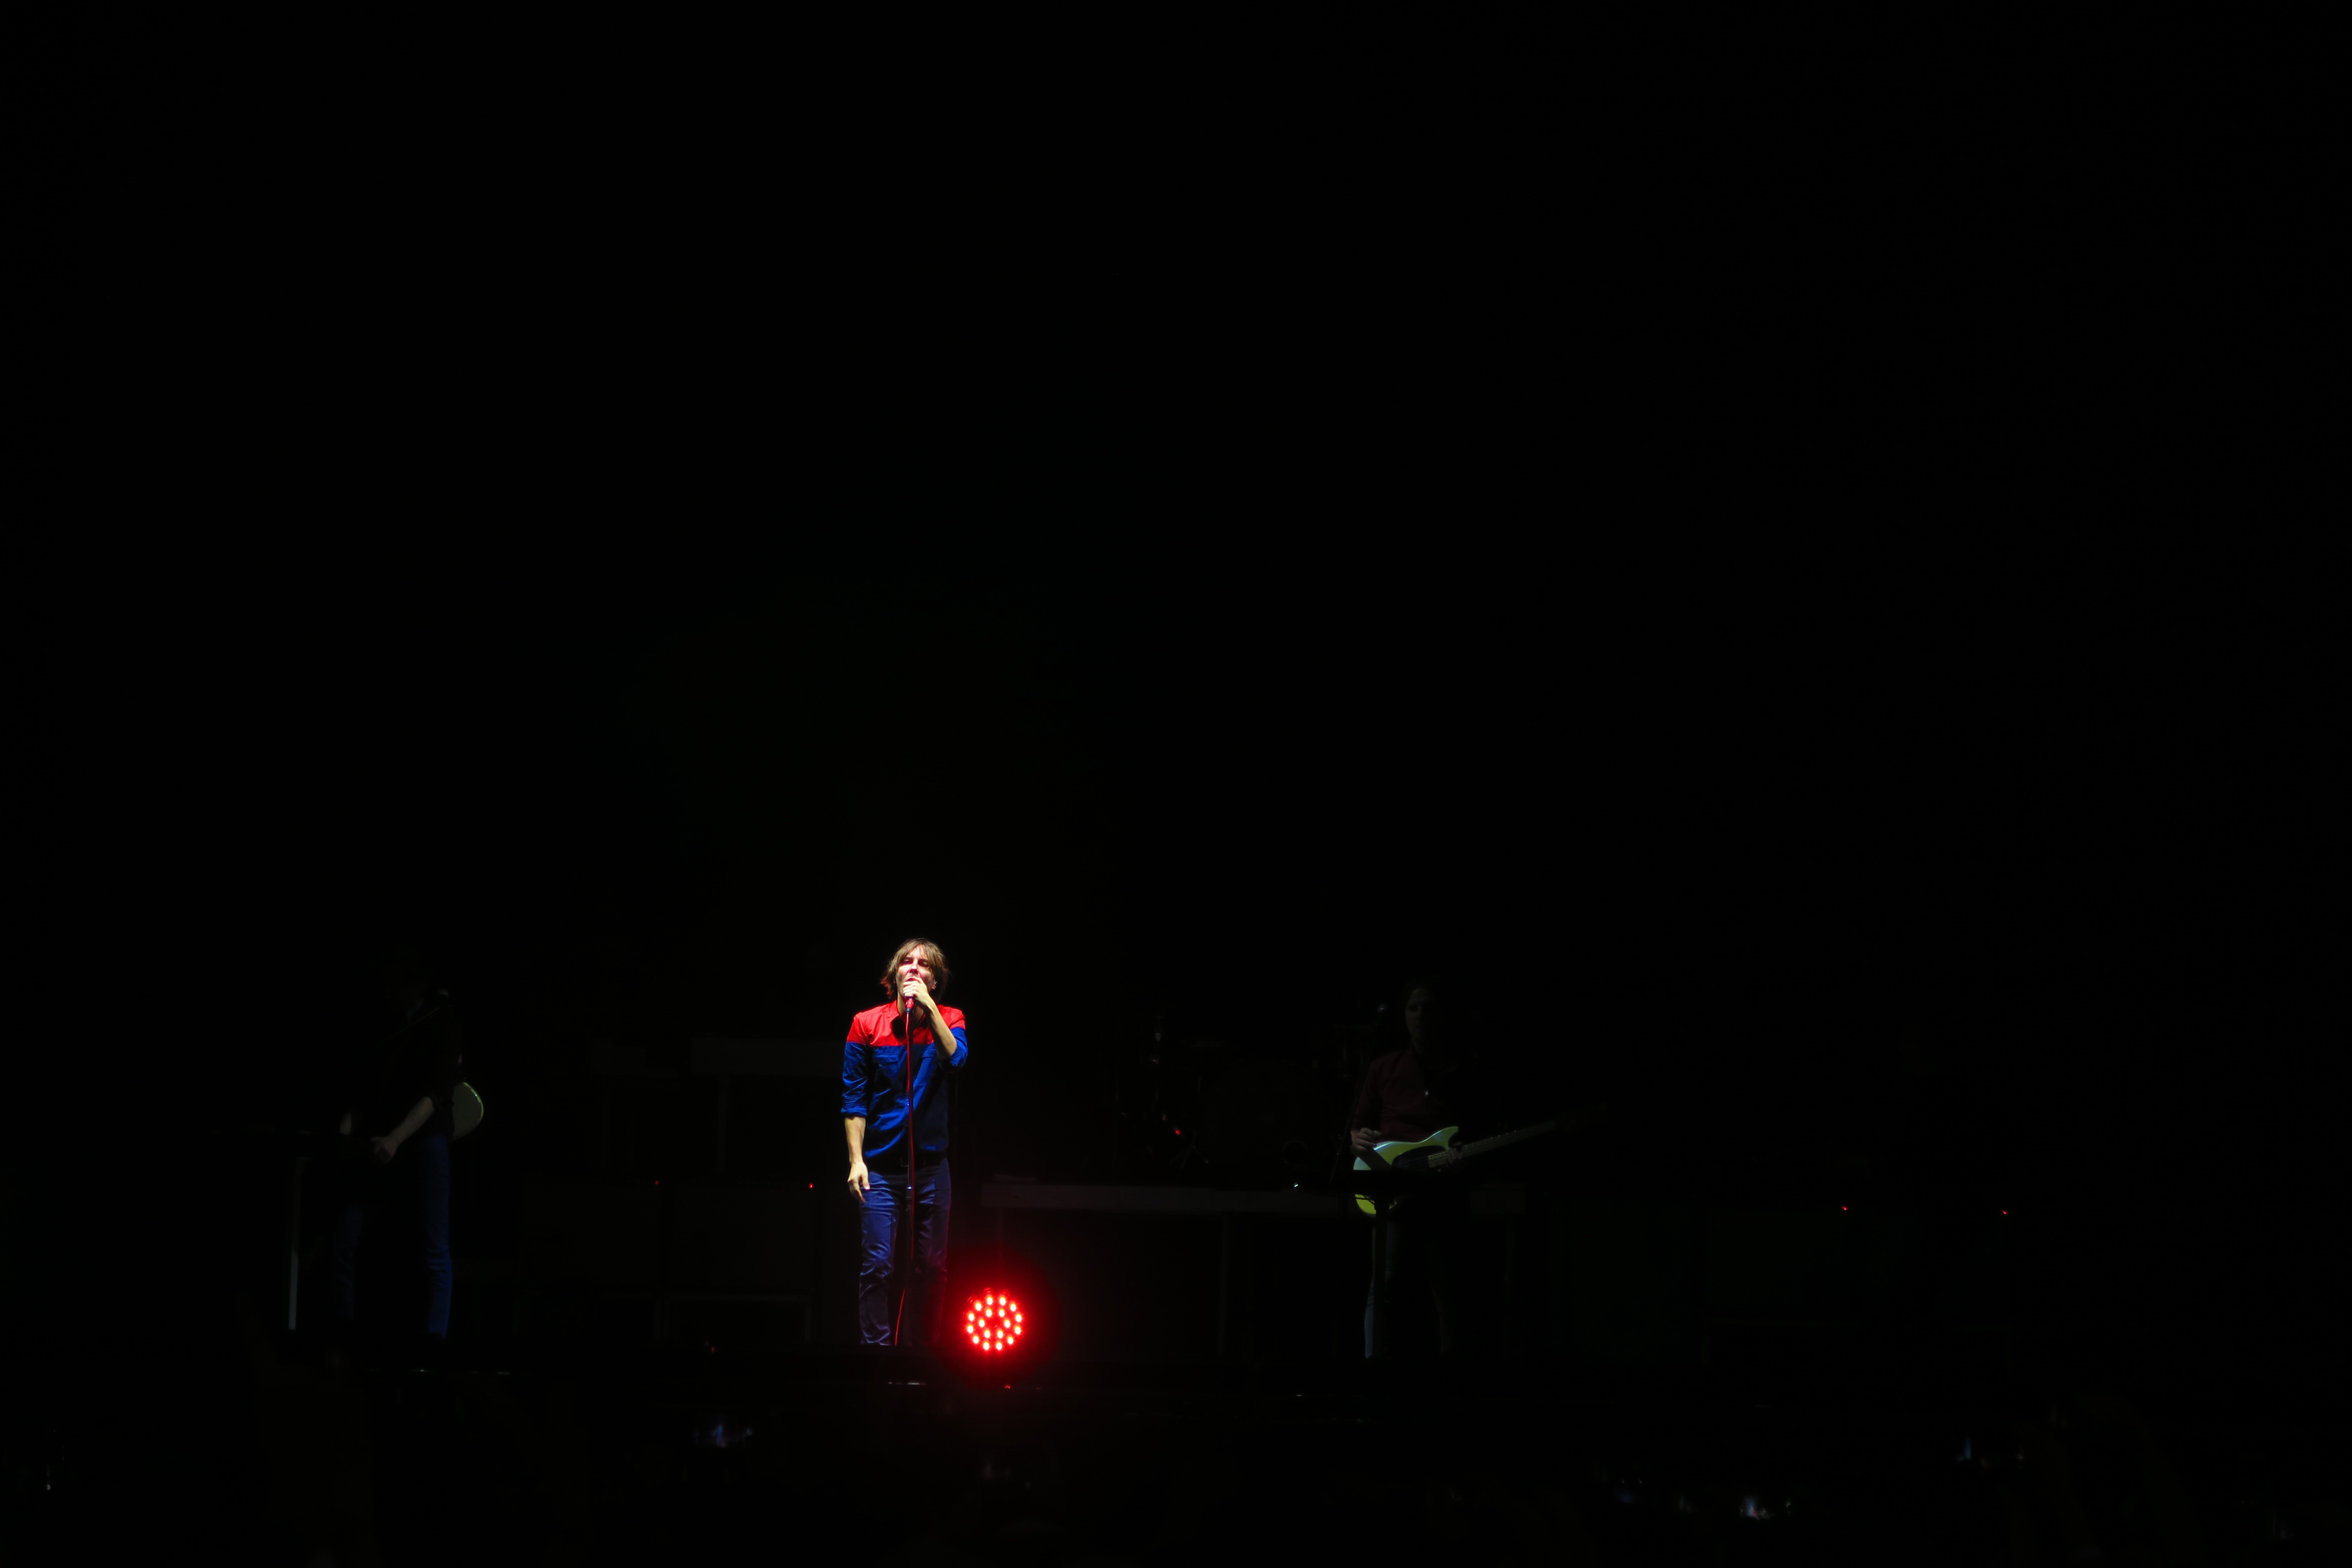 A lone woman performing solo on stage.